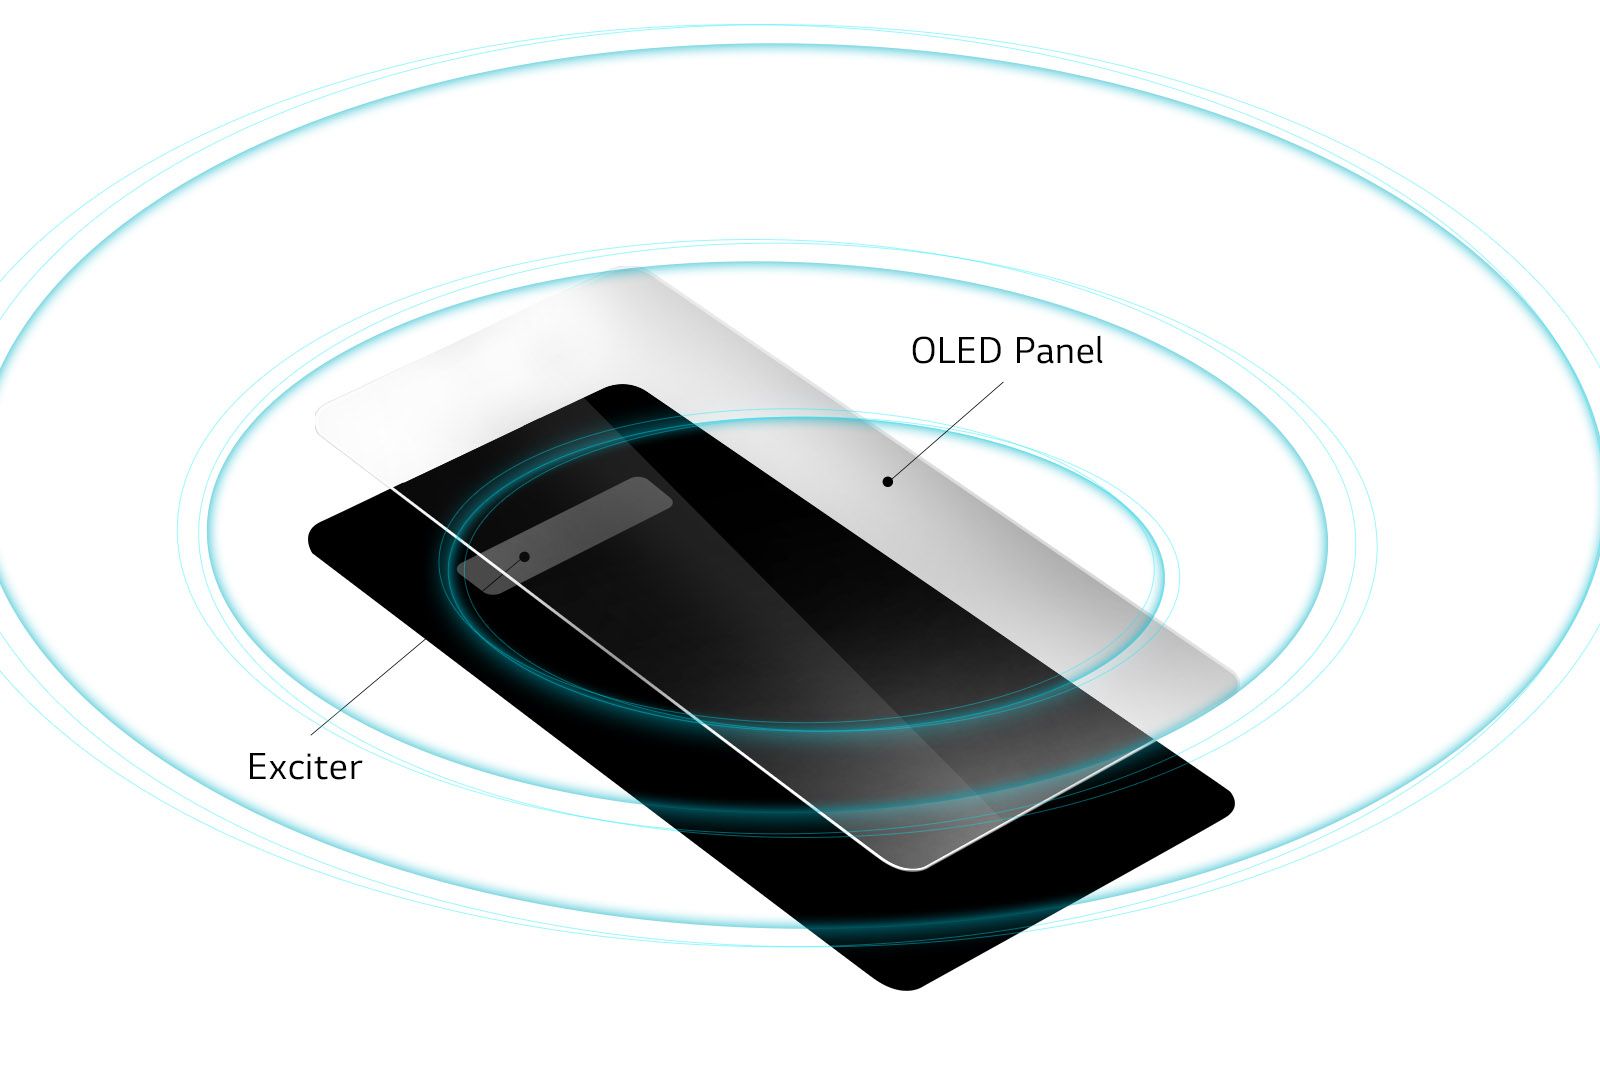 Lg G8 Thinq Will Use Its Oled Display As A Speaker More Official Details Revealed image 1